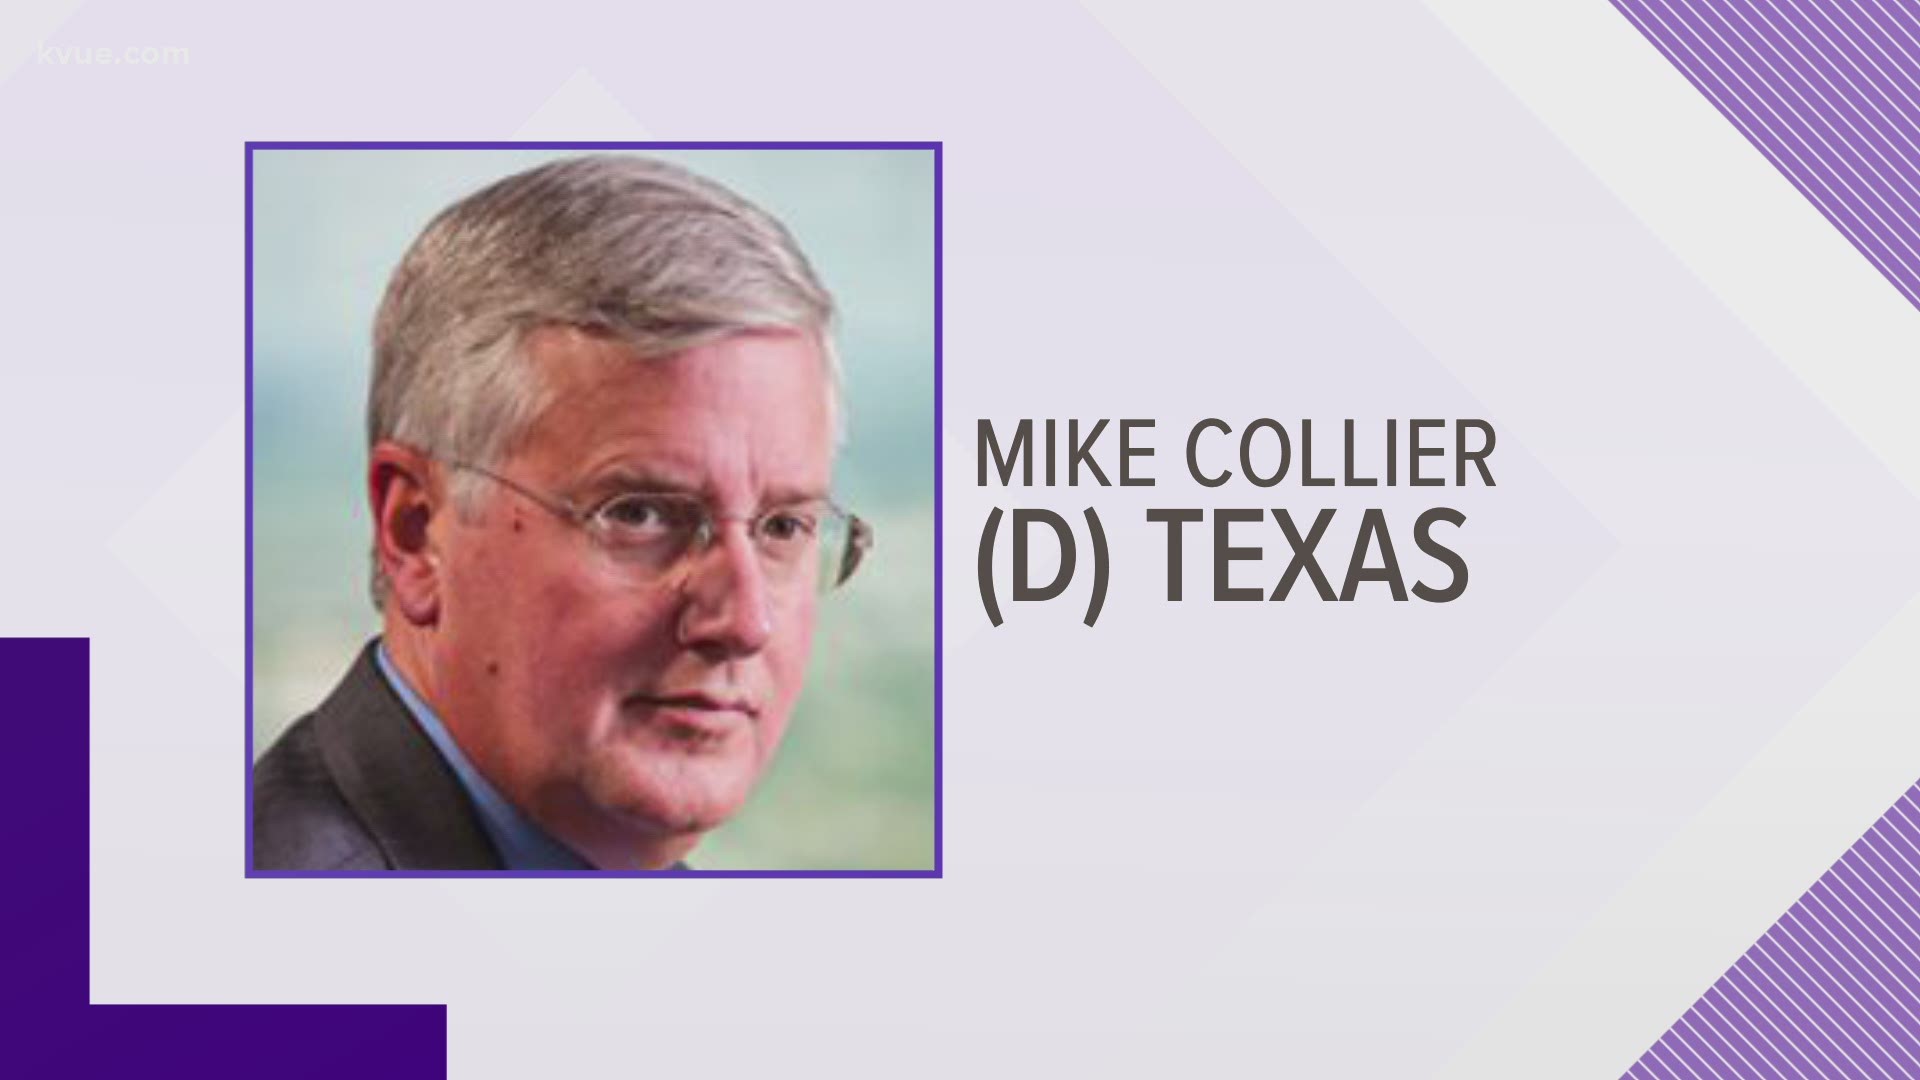 Mike Collier announced he's ready for a rematch with Lt. Gov. Dan Patrick and is launching an exploratory committee to challenge Patrick again next year.